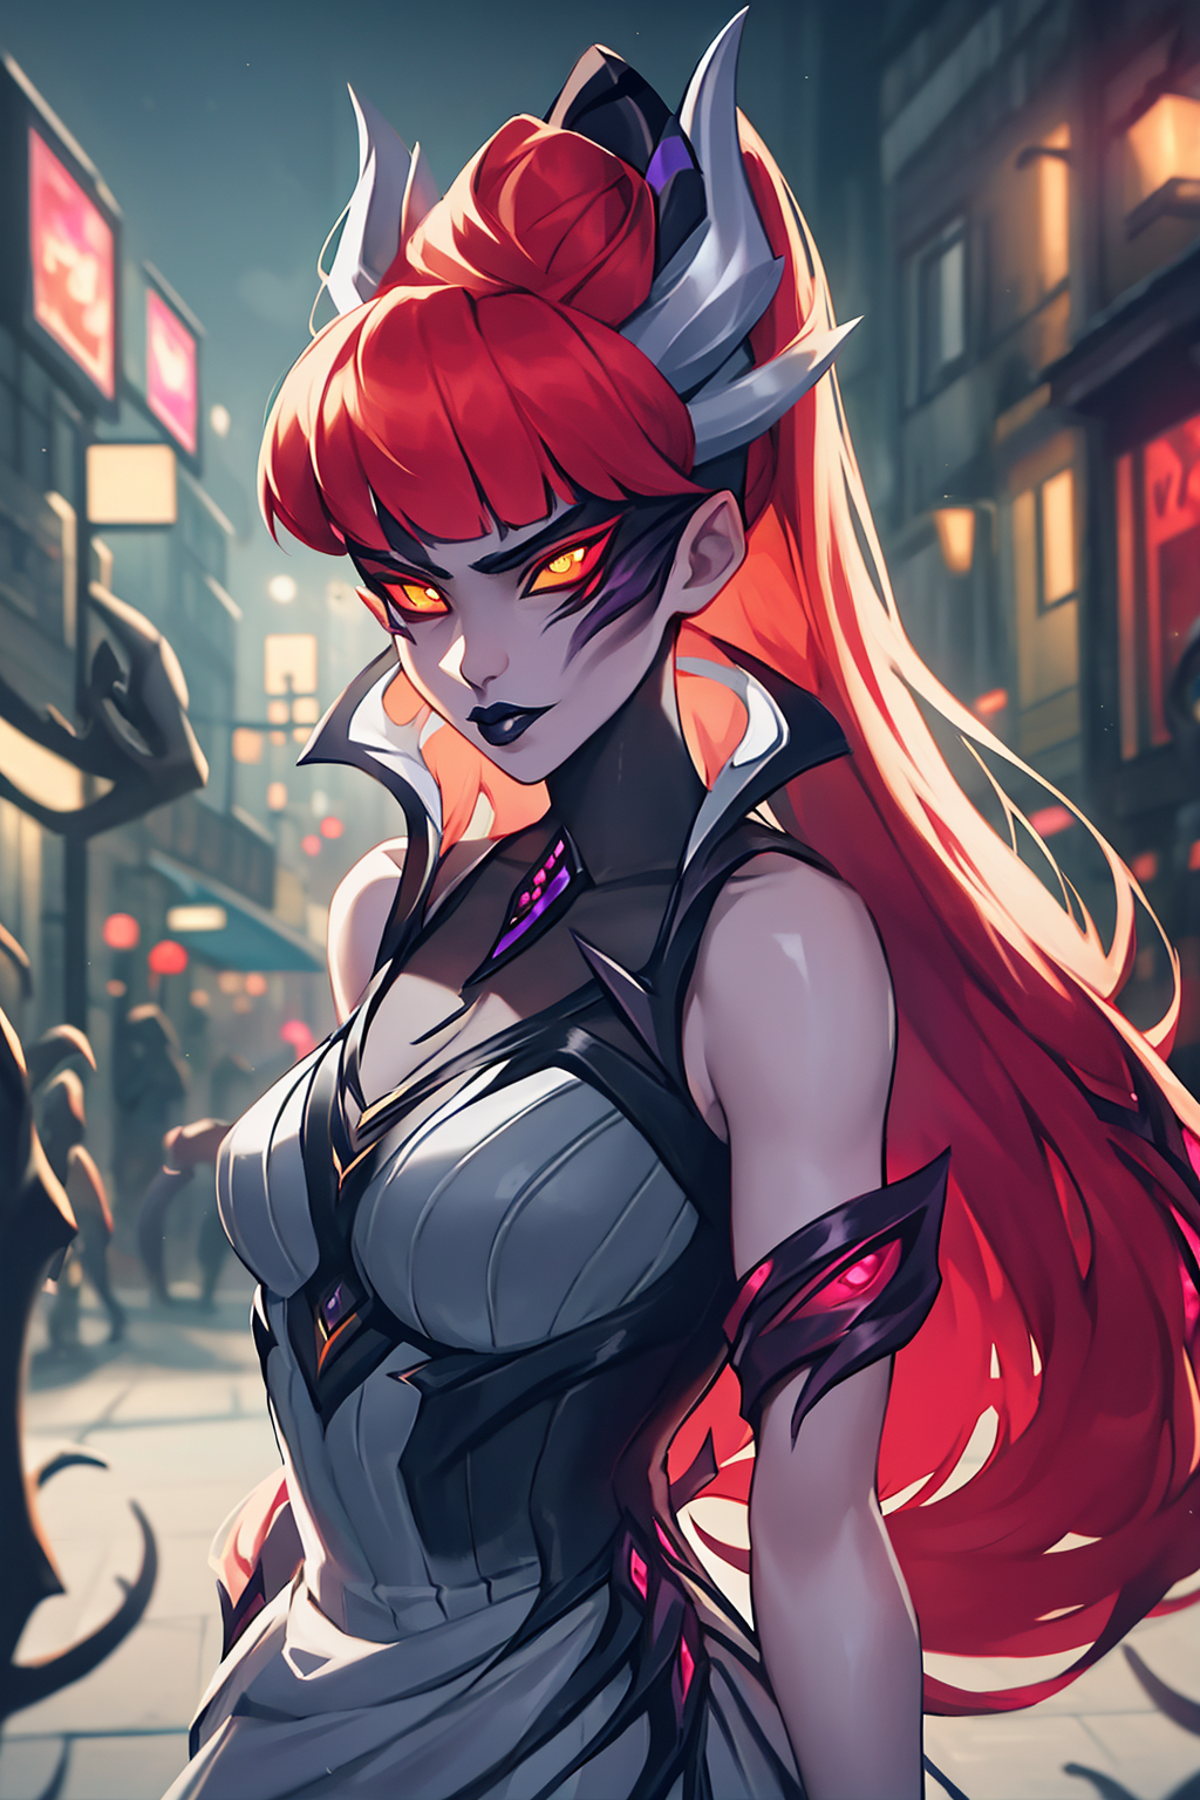 Crime City Nightmare Zyra - League of Legends - Character LORA image by Konan